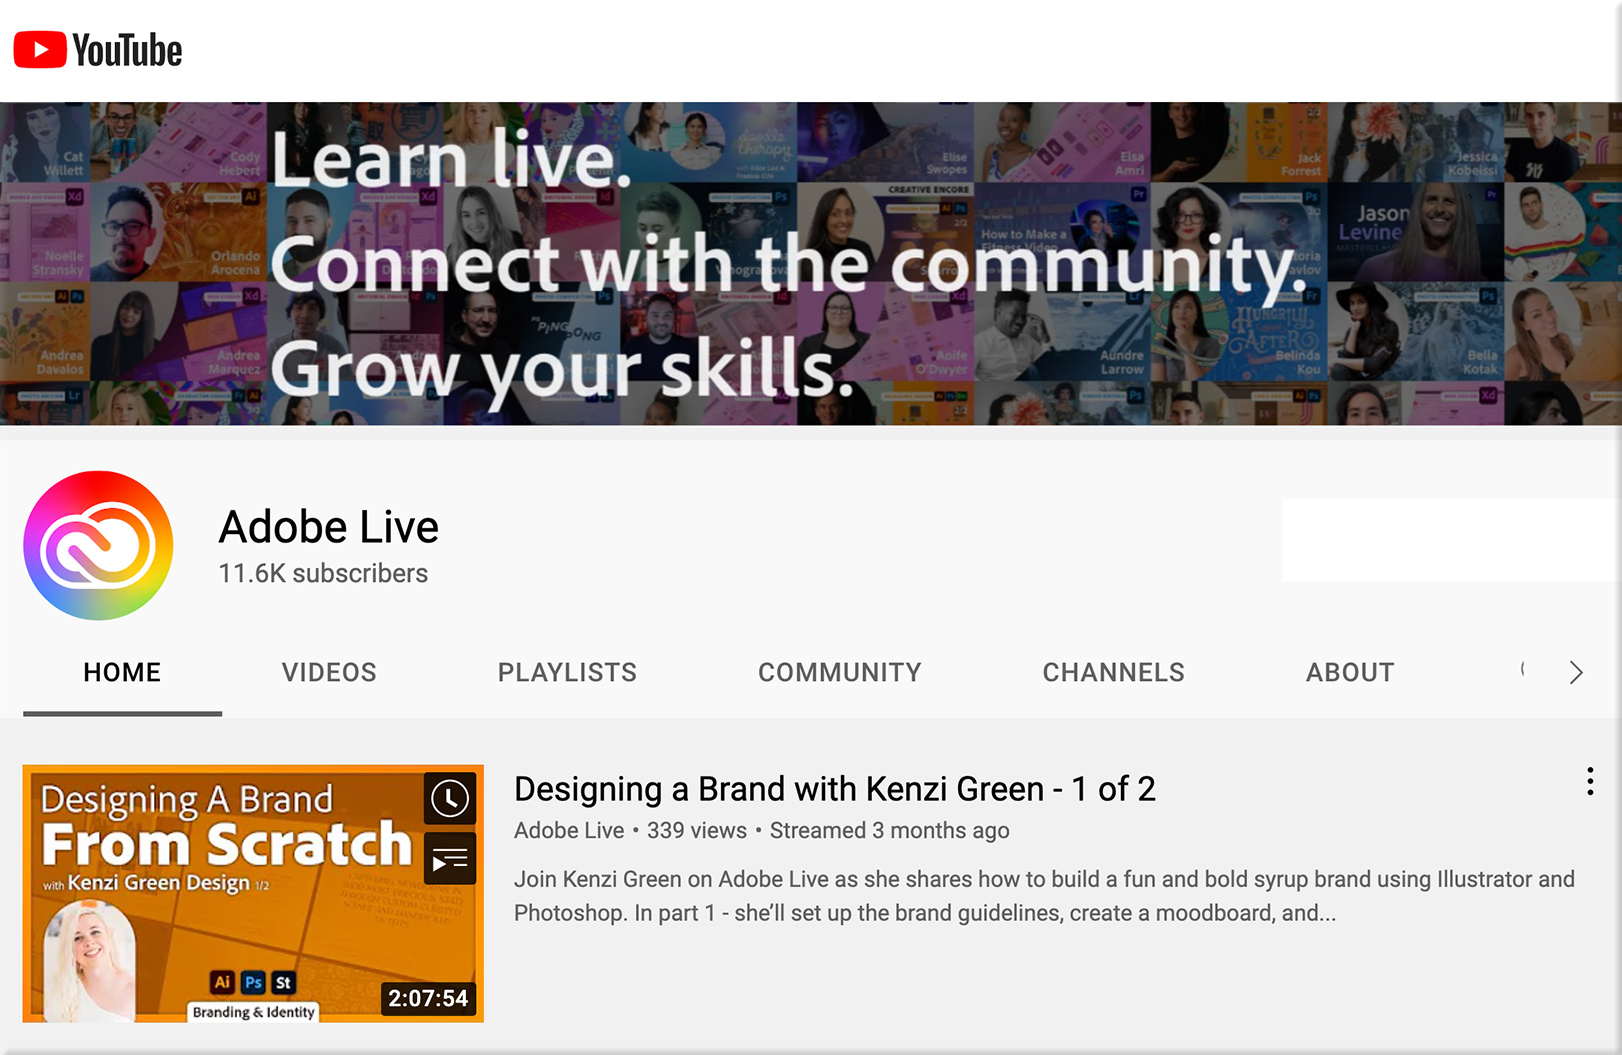 Adobe Live is now on YouTube -- as of 9-6-22